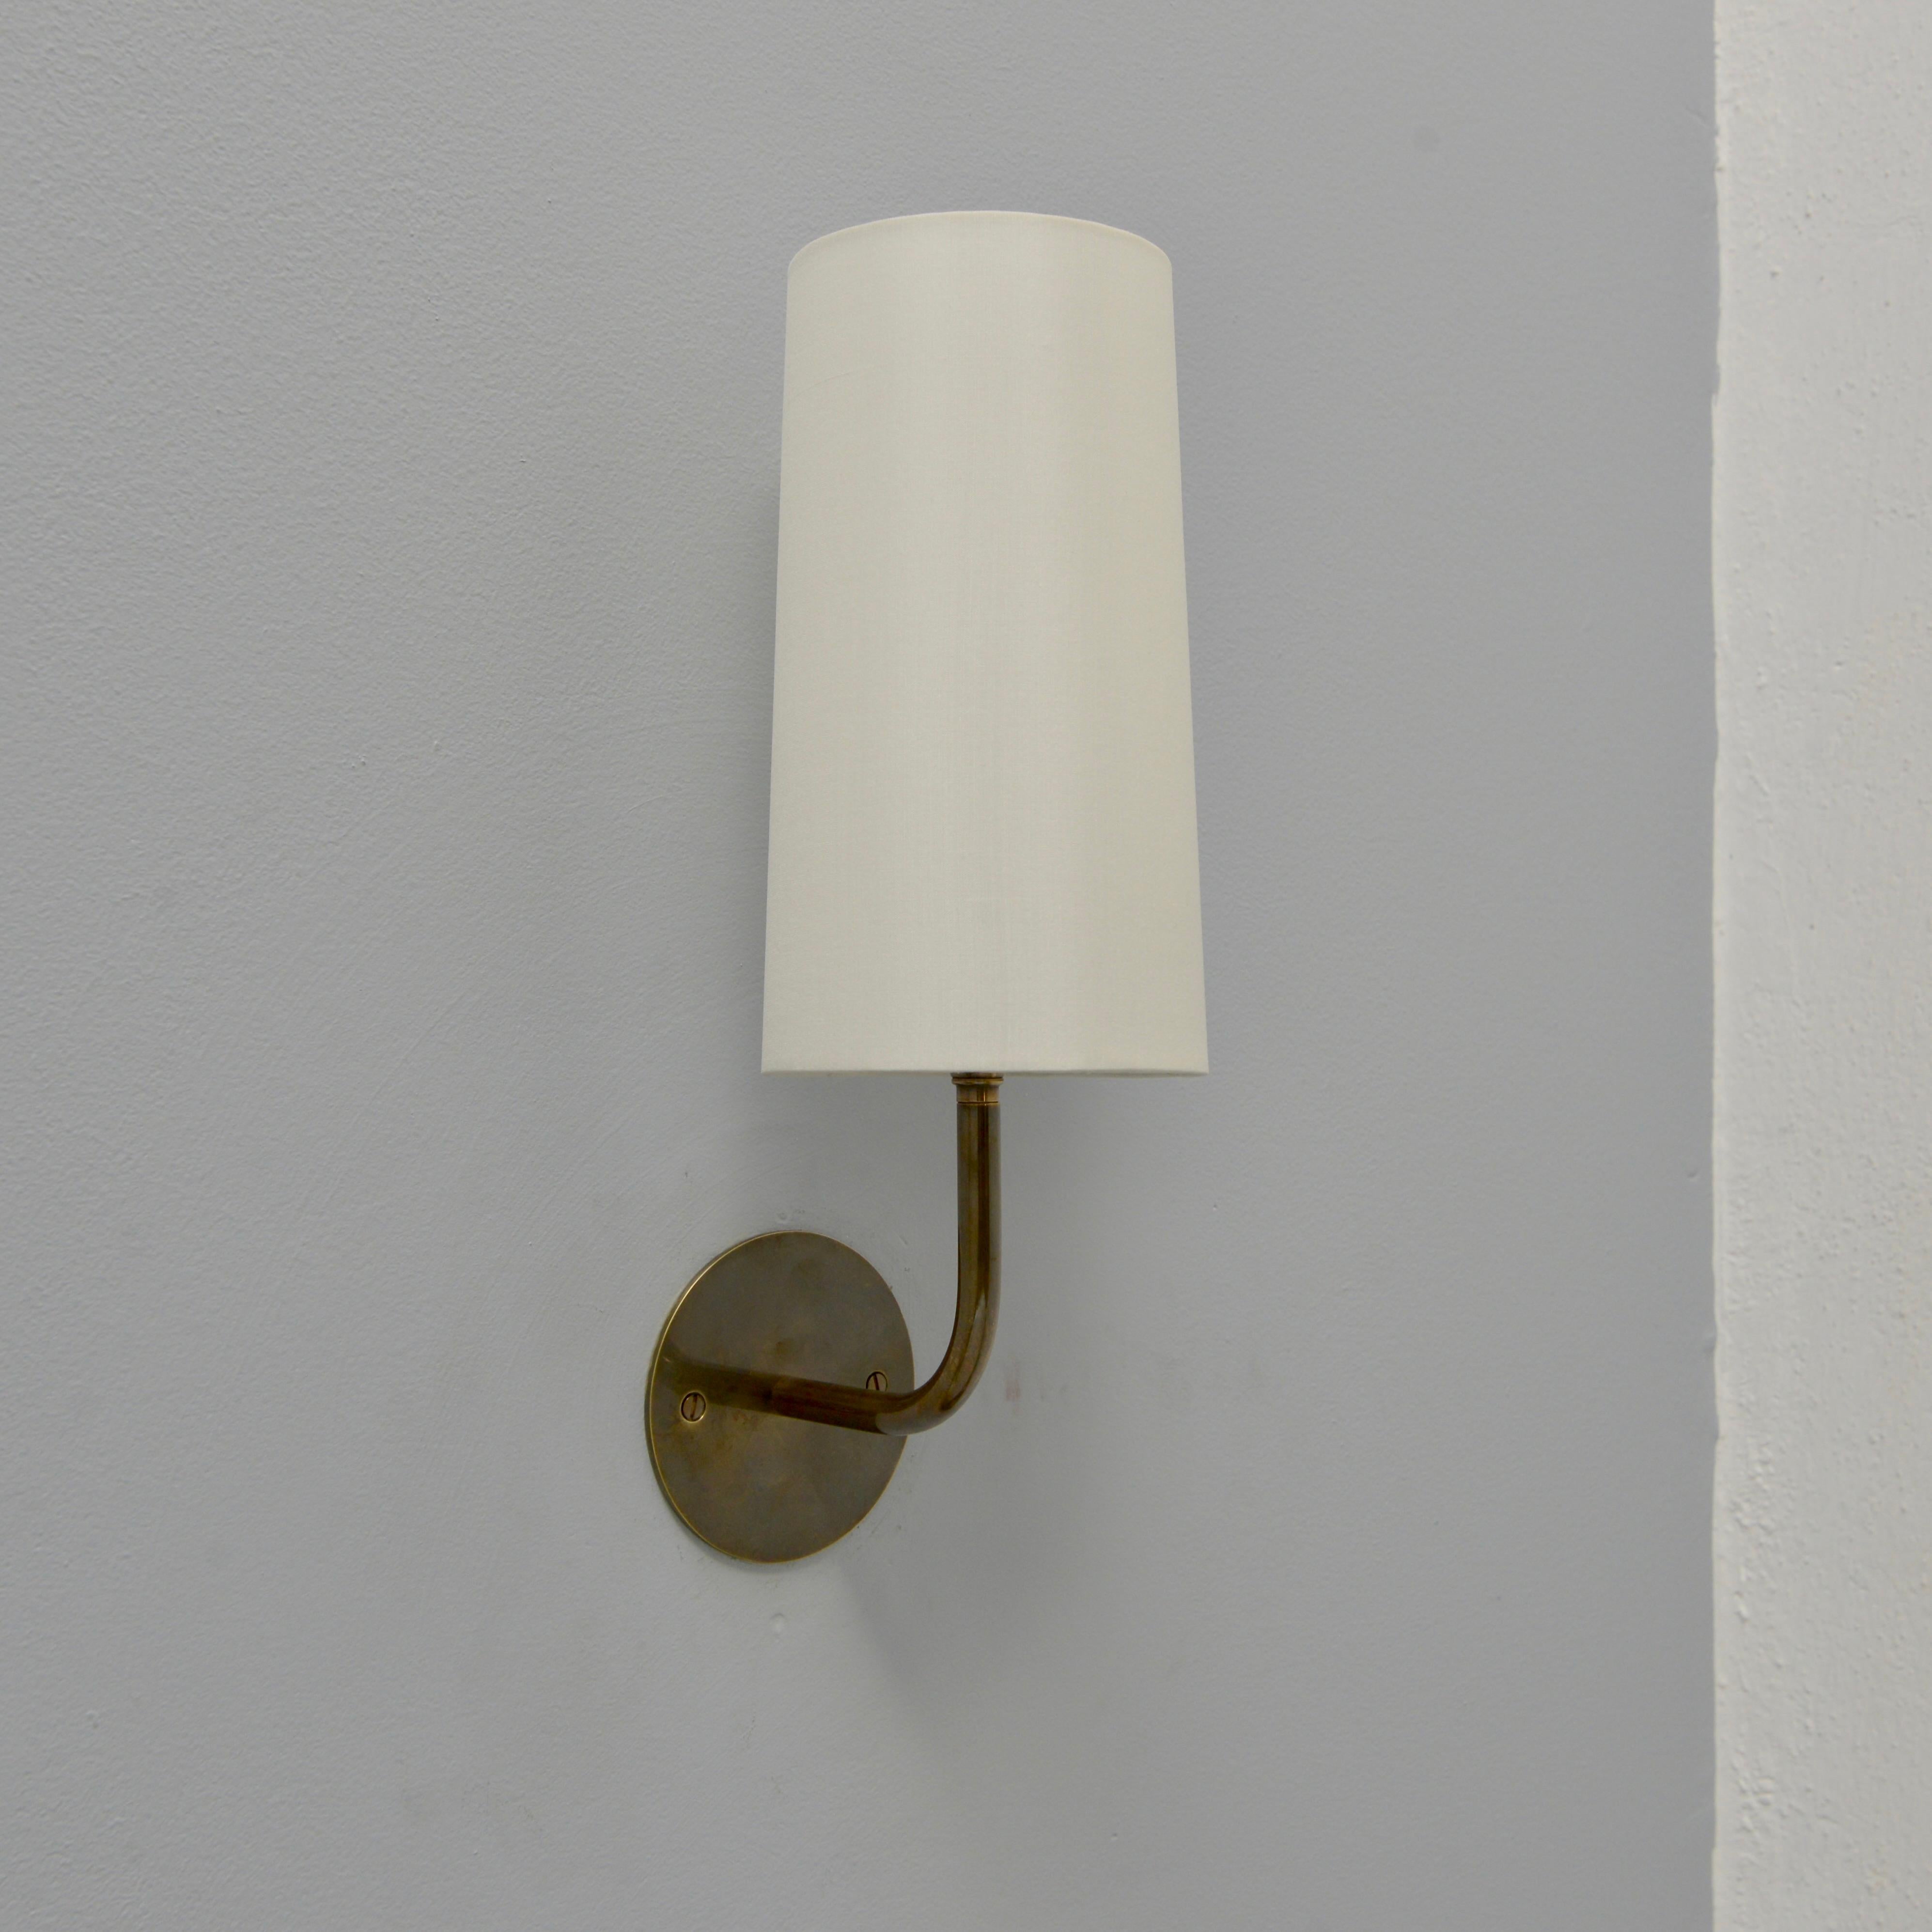 The elegant LUroy Sconce by Lumfardo Luminaires is a French inspired wall sconce in brass with fabric shade. The brass in finished in an unlacquered lightly patinated brass. This sconce is made in the USA and is part of our contemporary collection.